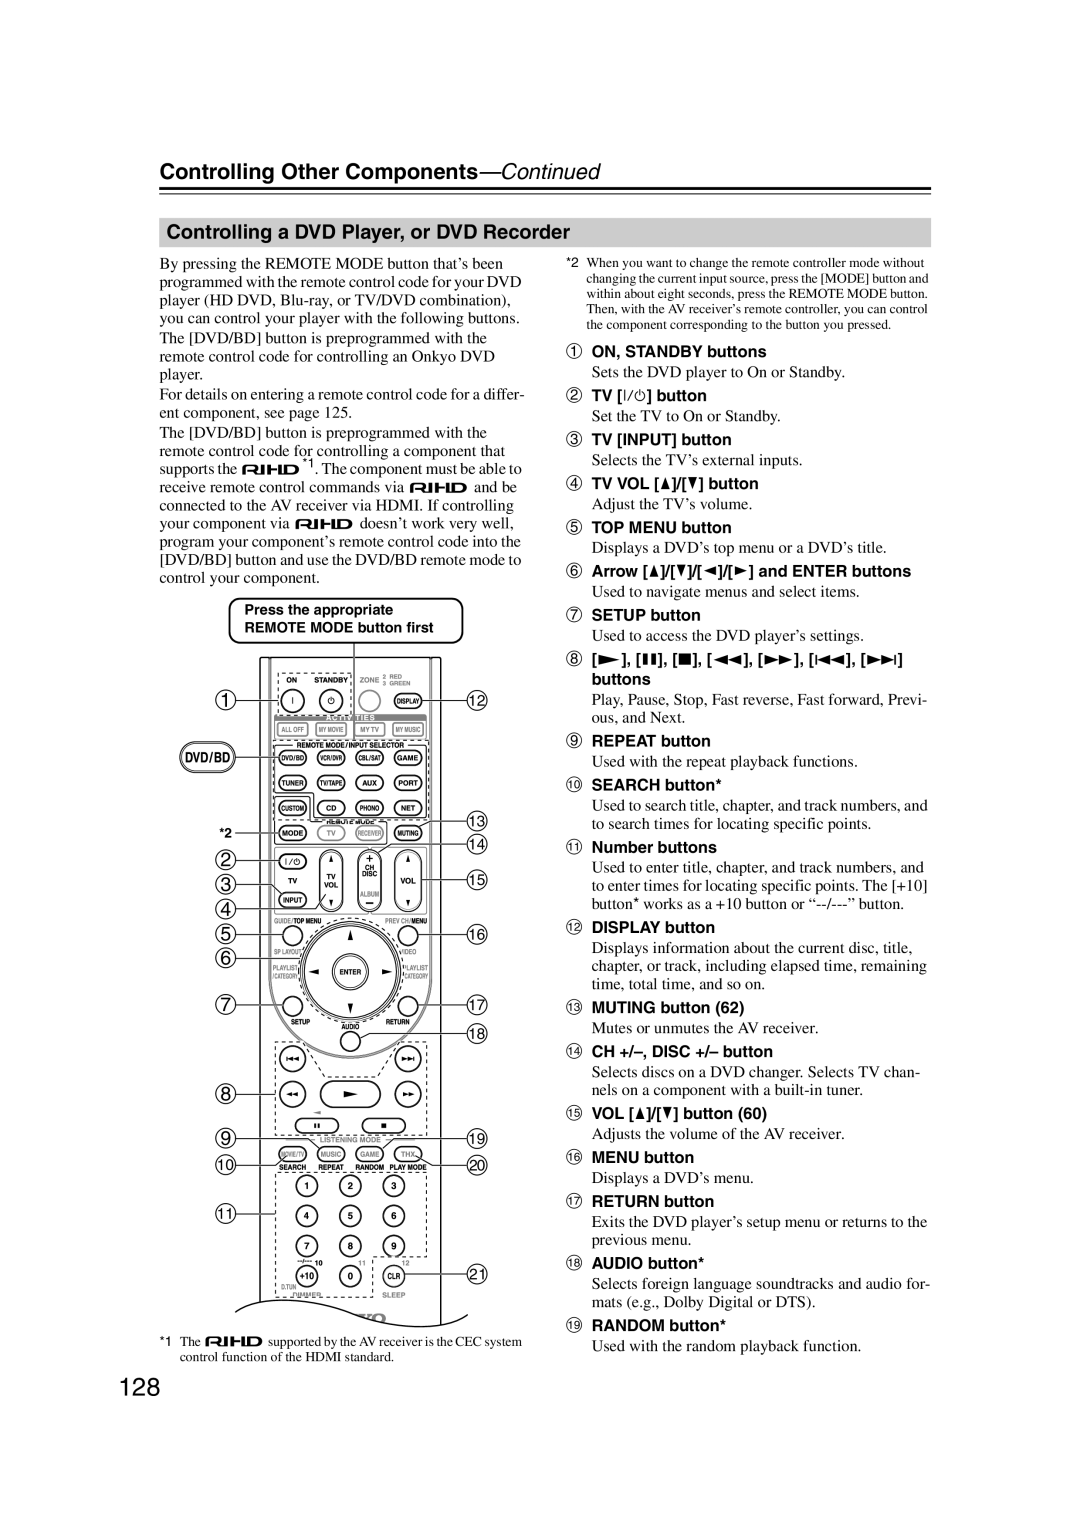 Onkyo TX-NR807, 29400021, HT-RC180 instruction manual gq r h, Controlling Other Components—Continued 